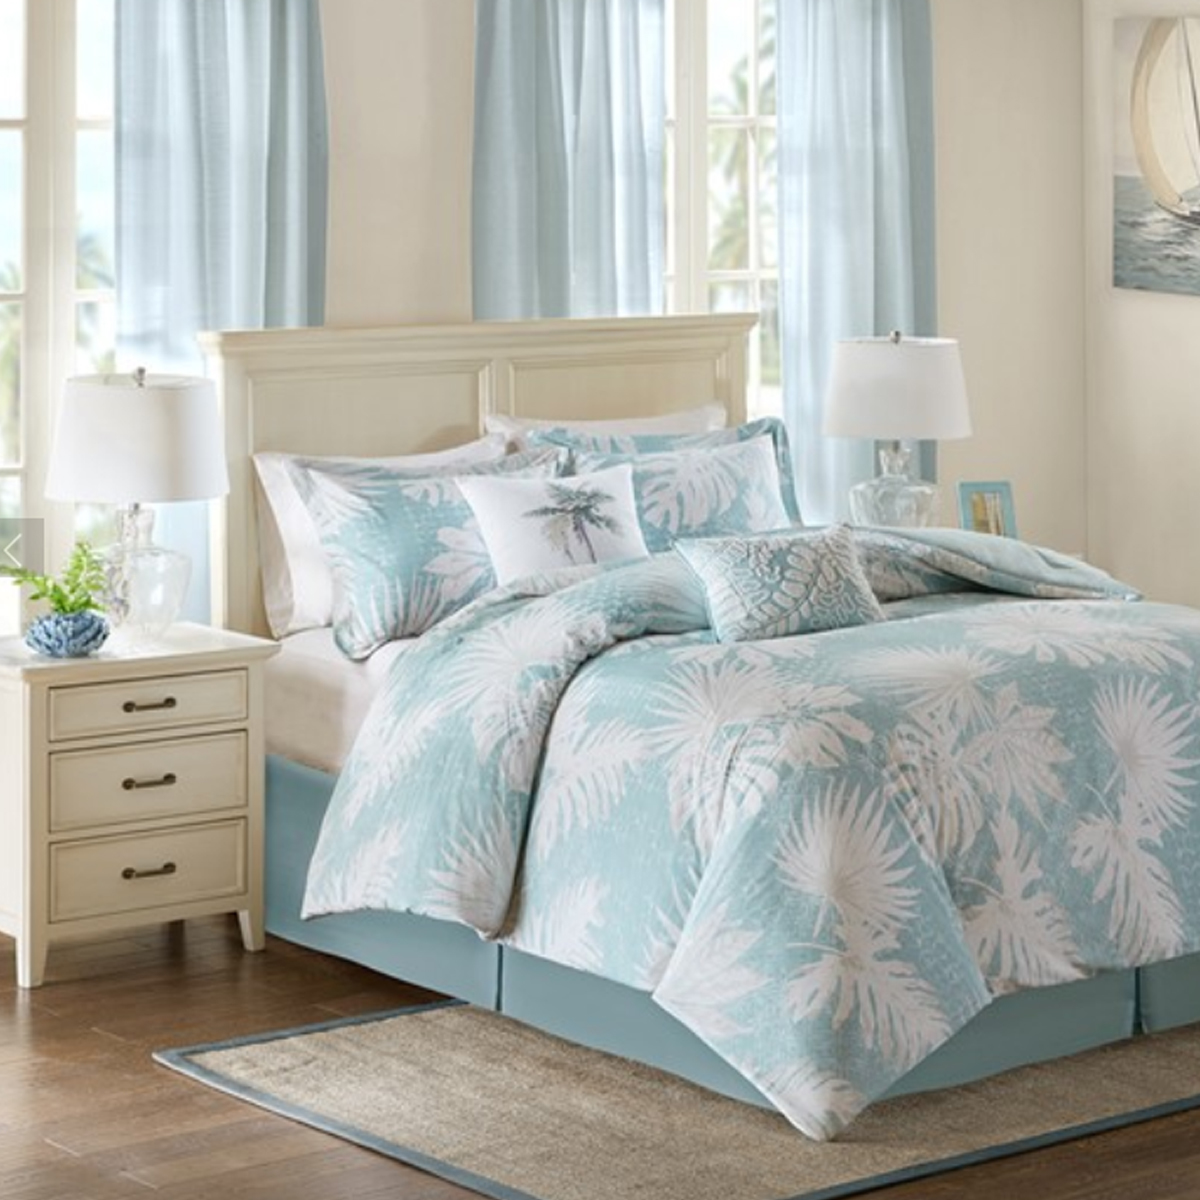 Picture of PALM GROVE 6 PIECE COMFORTER SET - KING